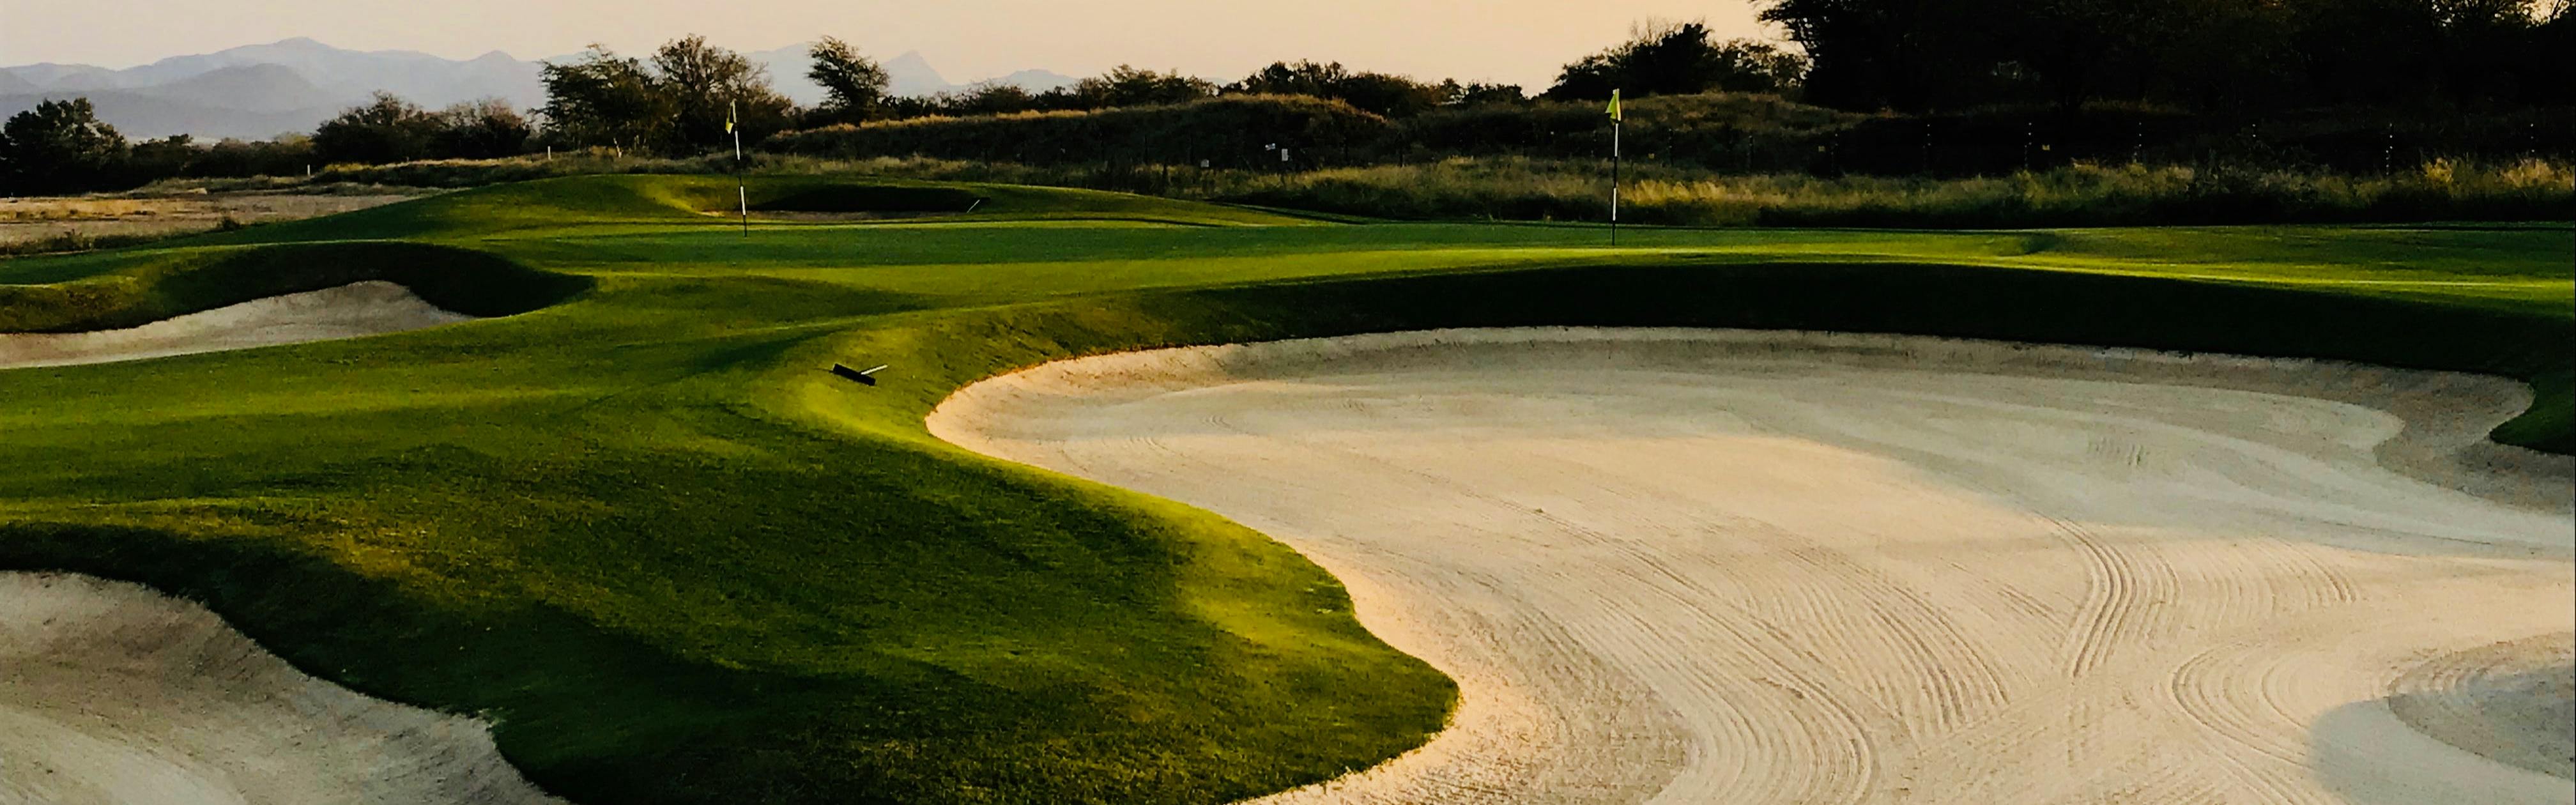 A close up of a sand pit on a golf hole.